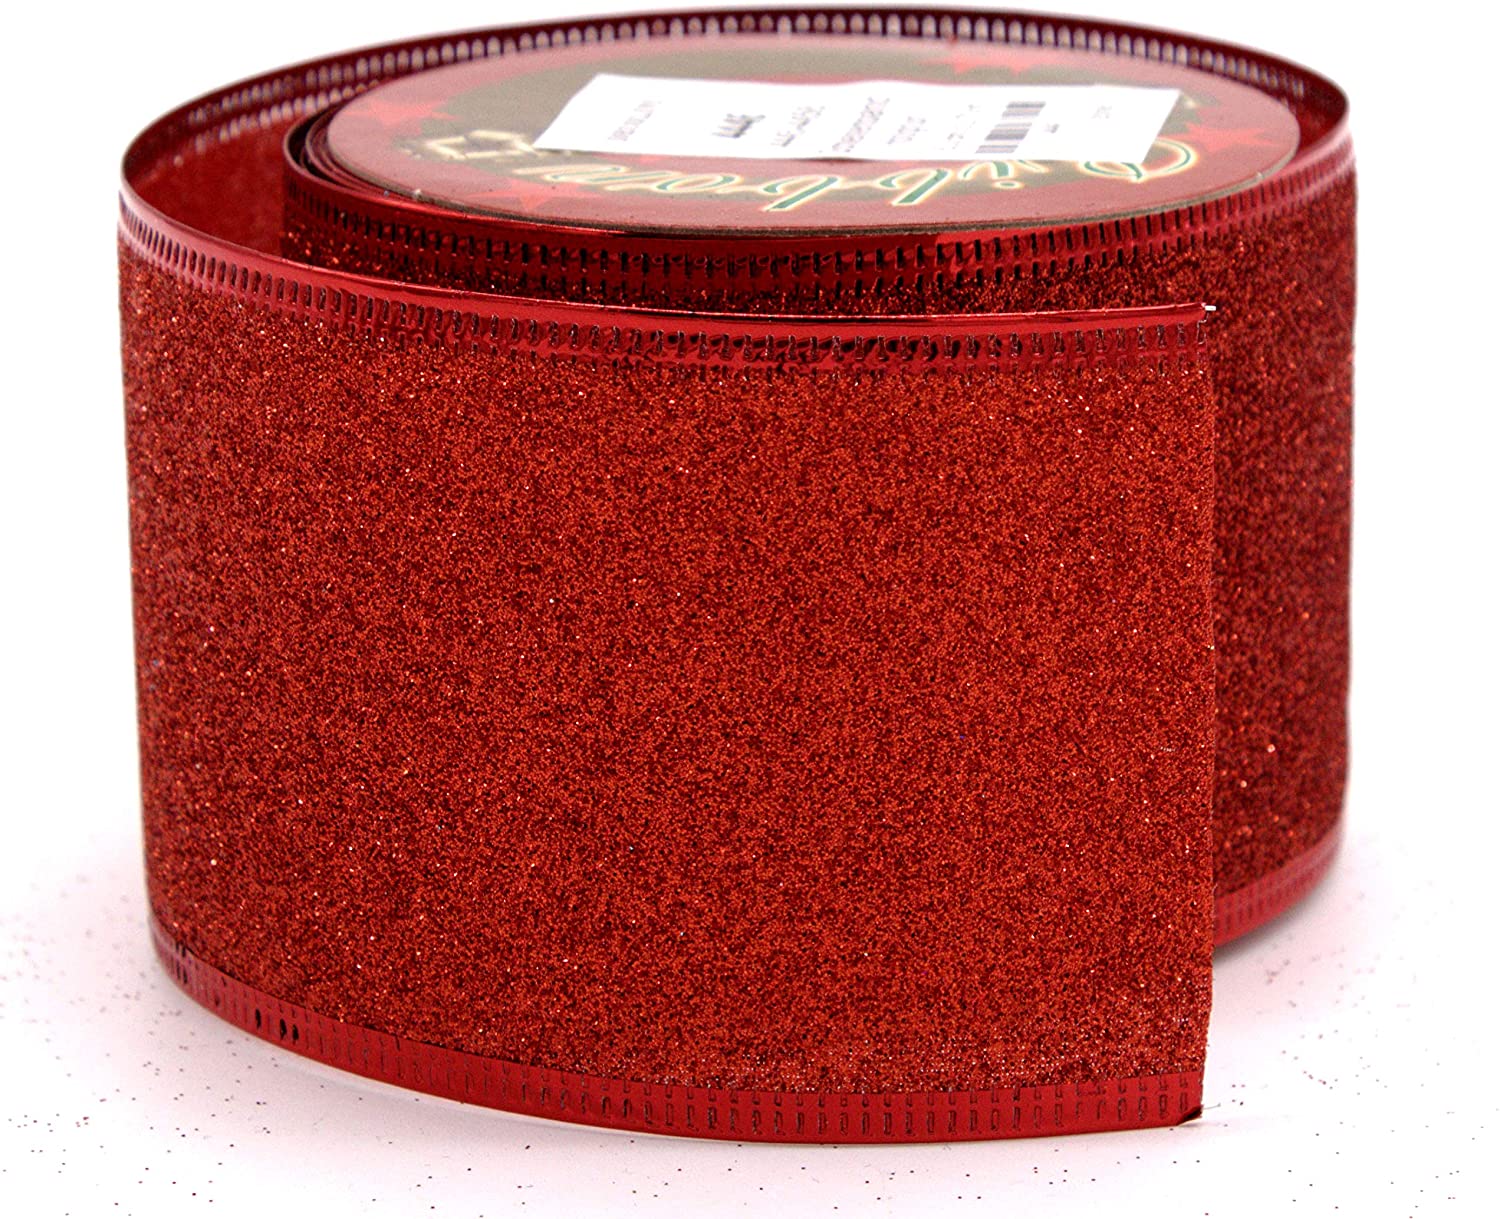 Daro Decorative Fabric Ribbon 6.3 Cm X 2.7 M In Red Or Green - 1 Piece Or 3